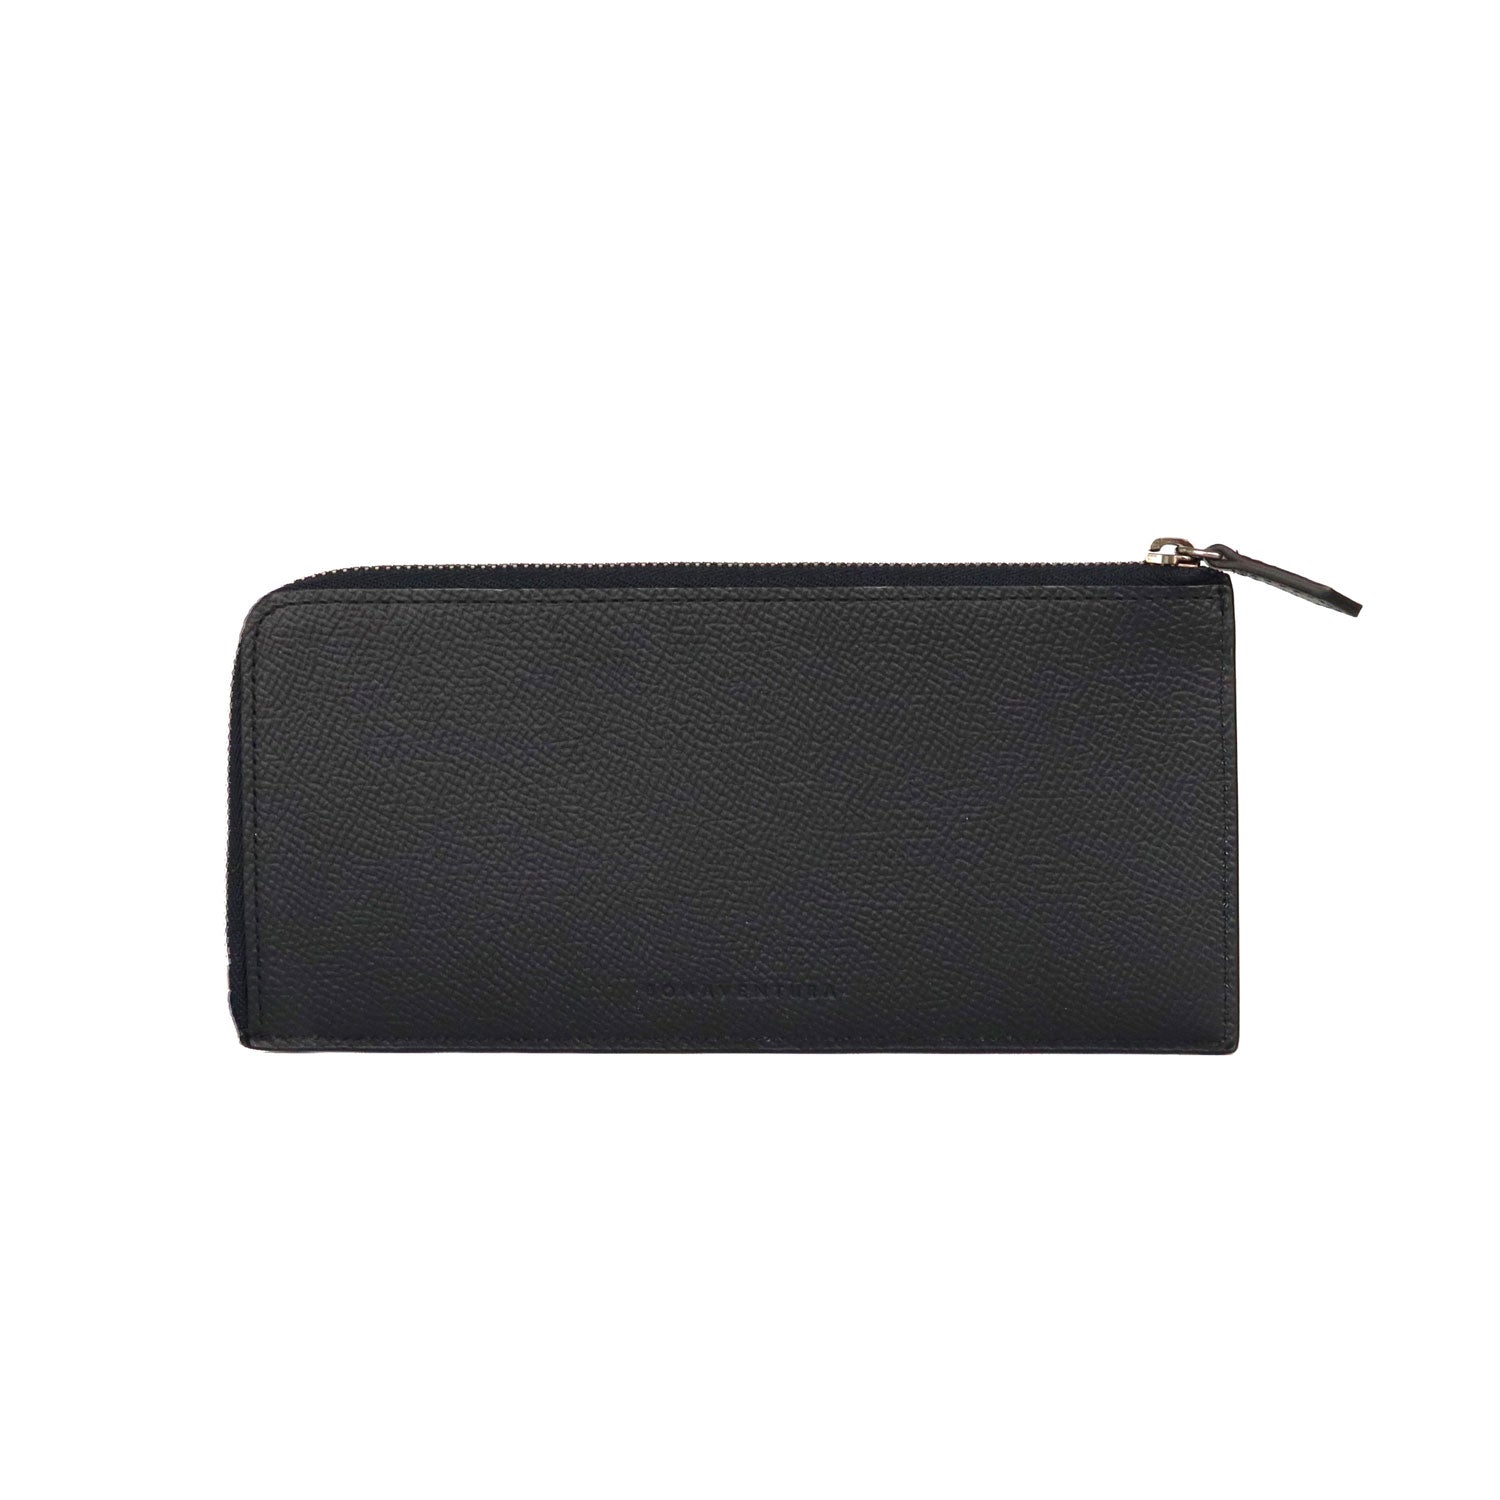 Long L-shaped zip wallet in Noblesse leather